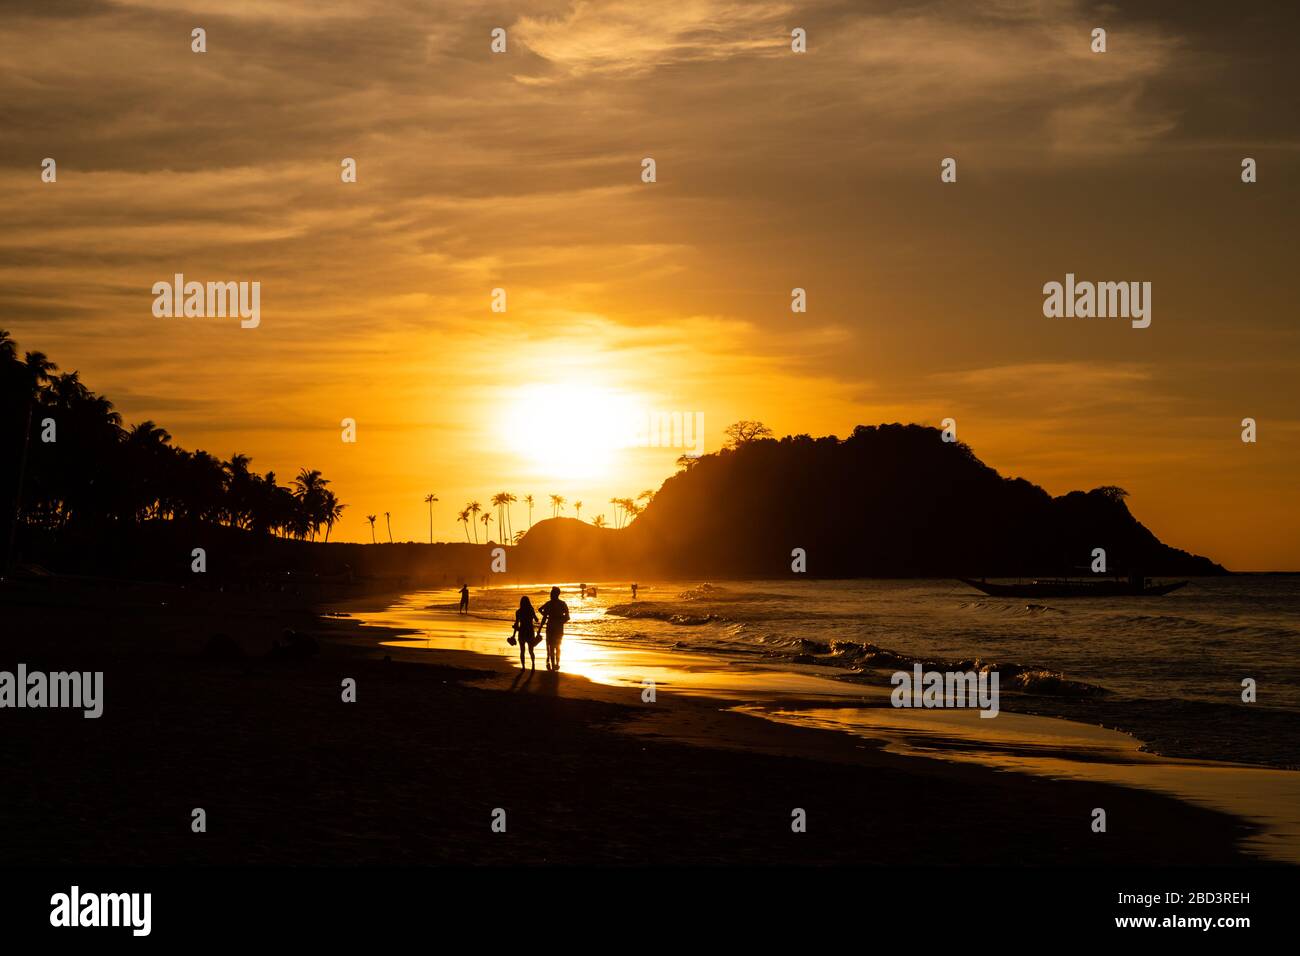 Two silhouetted individuals walk at sunset on Nacpan Beach in El Nido, Palawan, Philippines Stock Photo